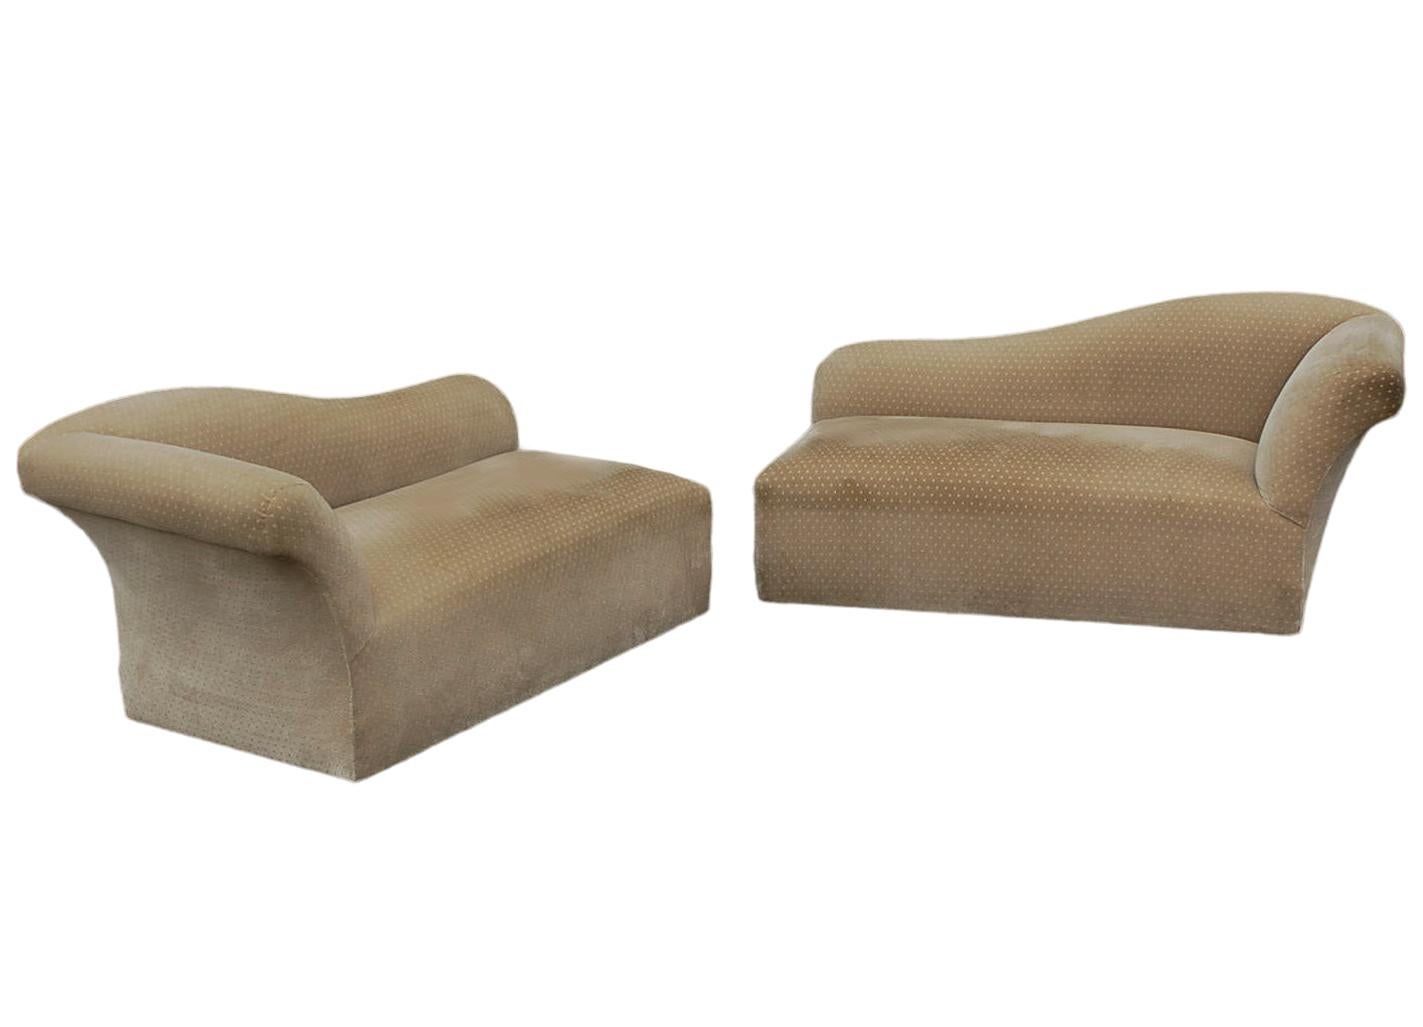 American Mid-Century Modern Sculptural Sectional Sofa or Pair of Chaise Lounges